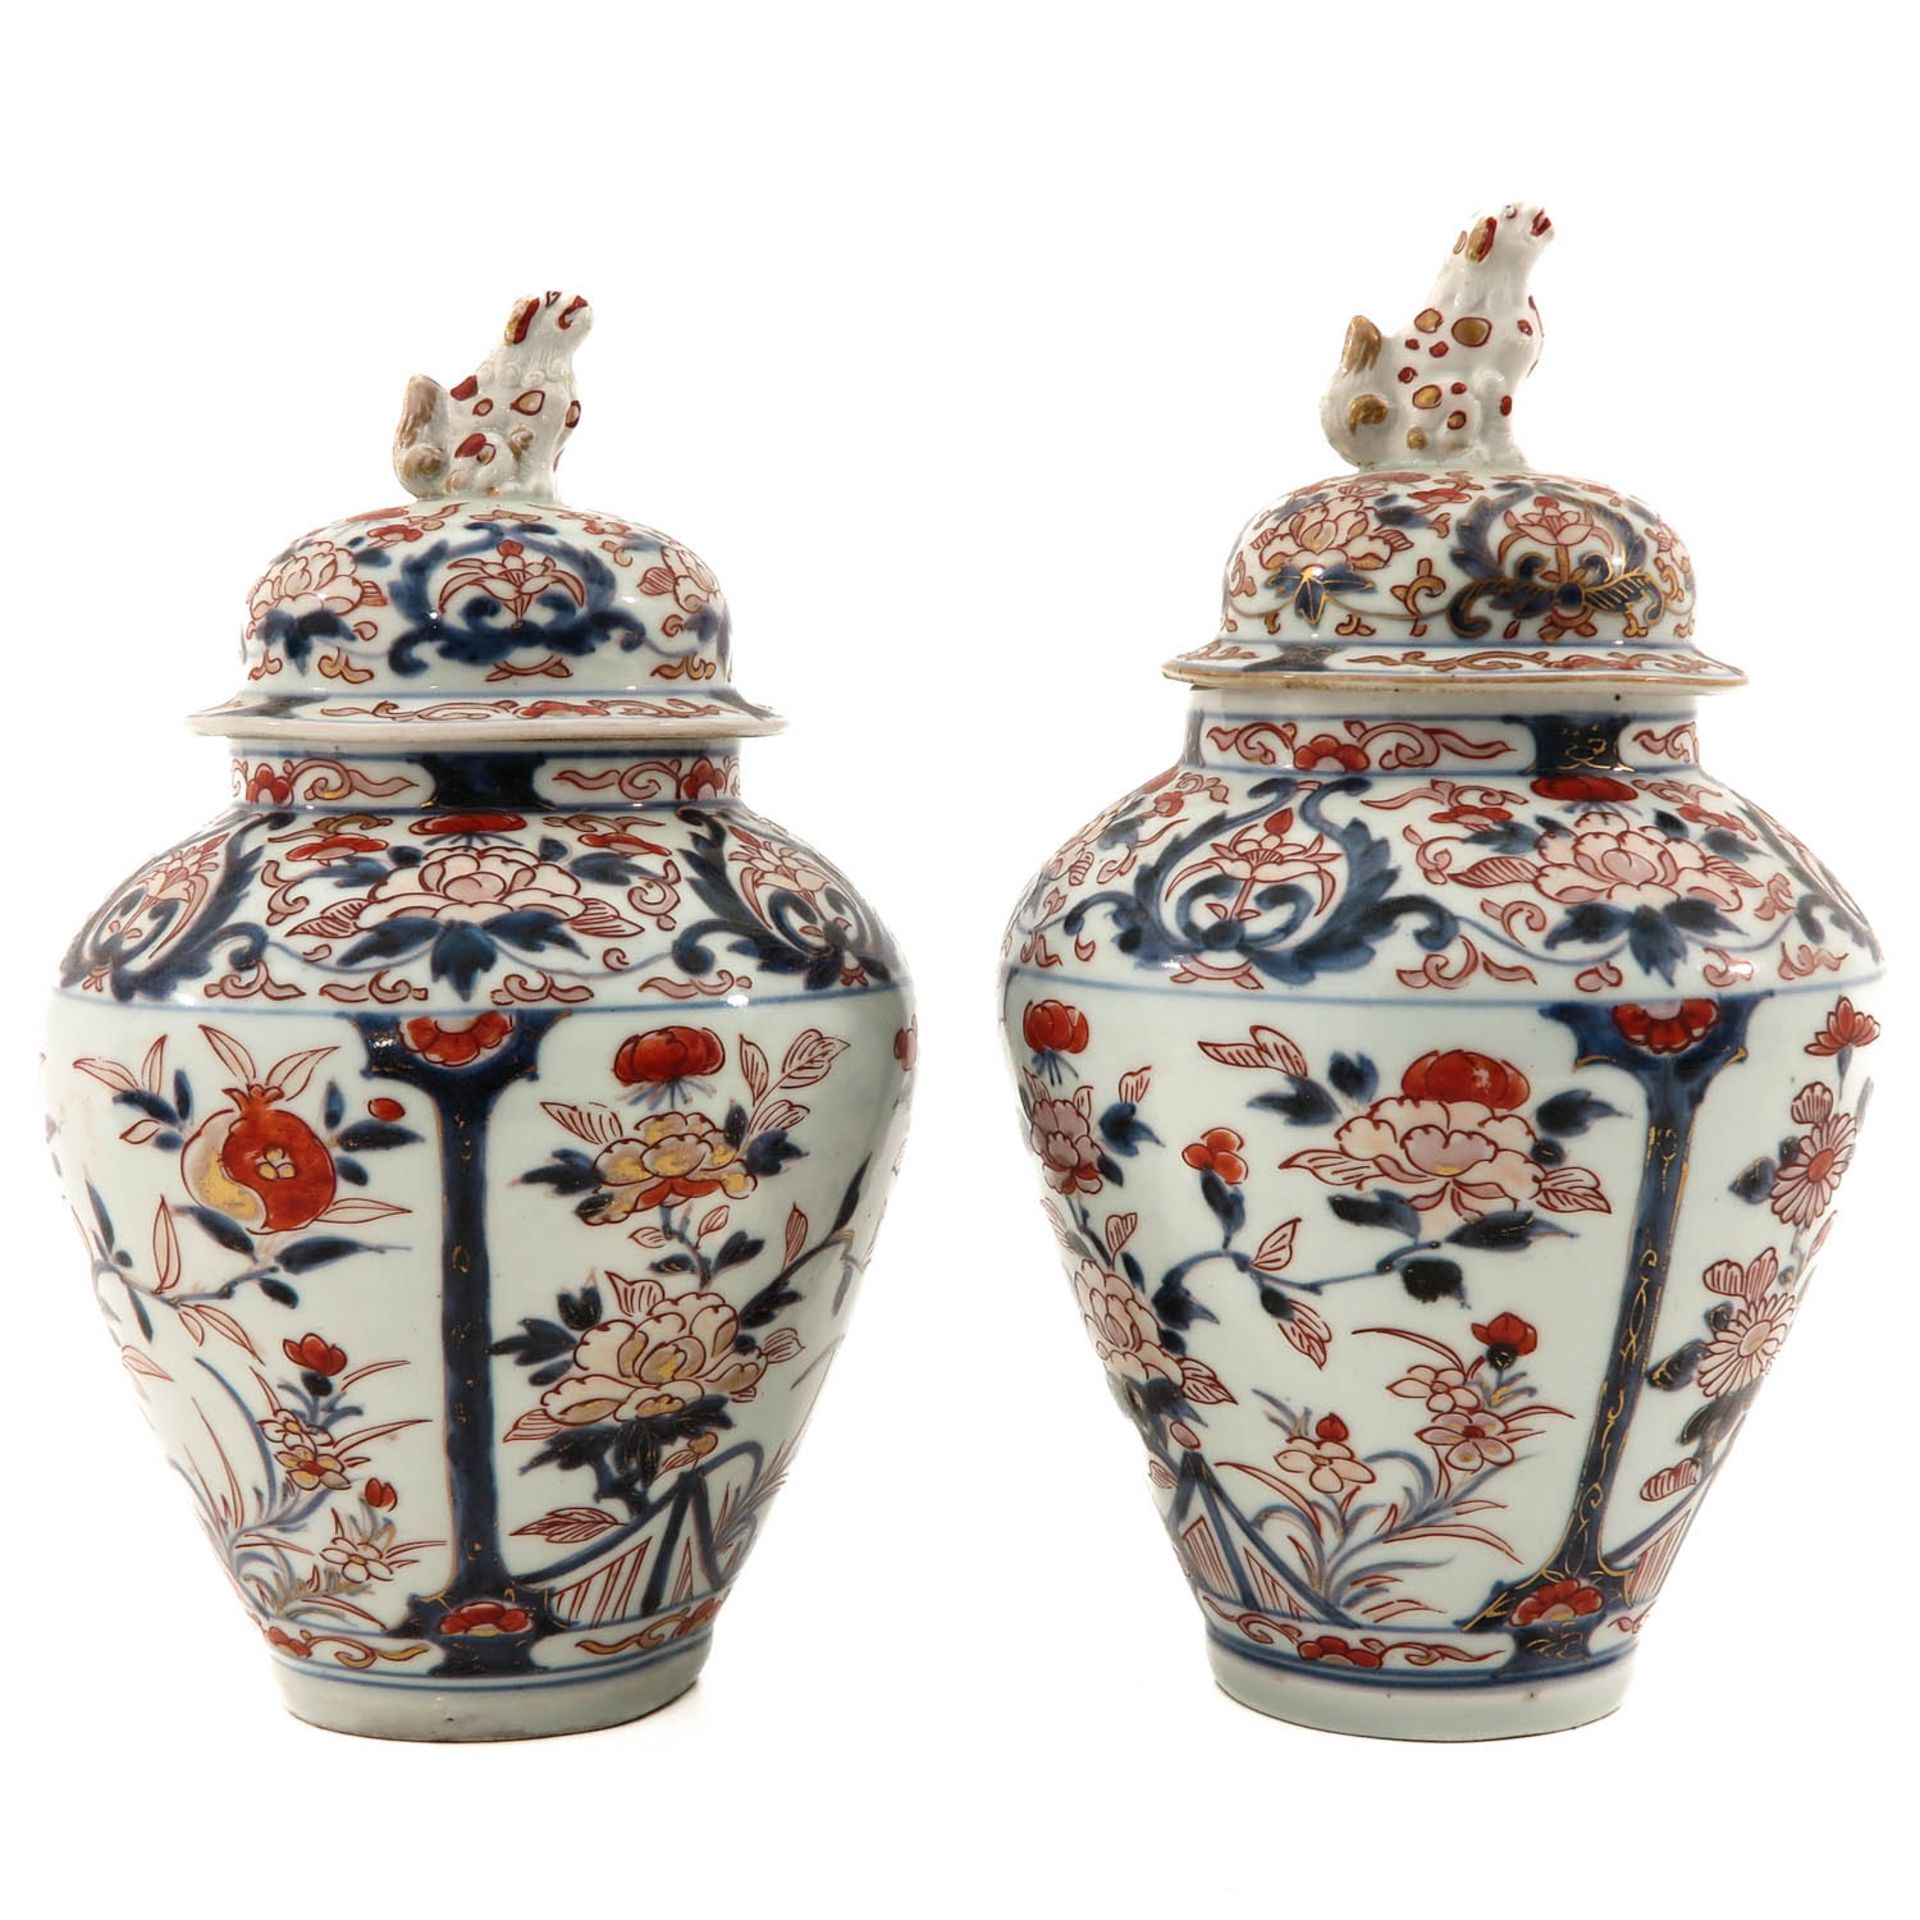 A Pair of Arita Jars with Covers - Image 3 of 9